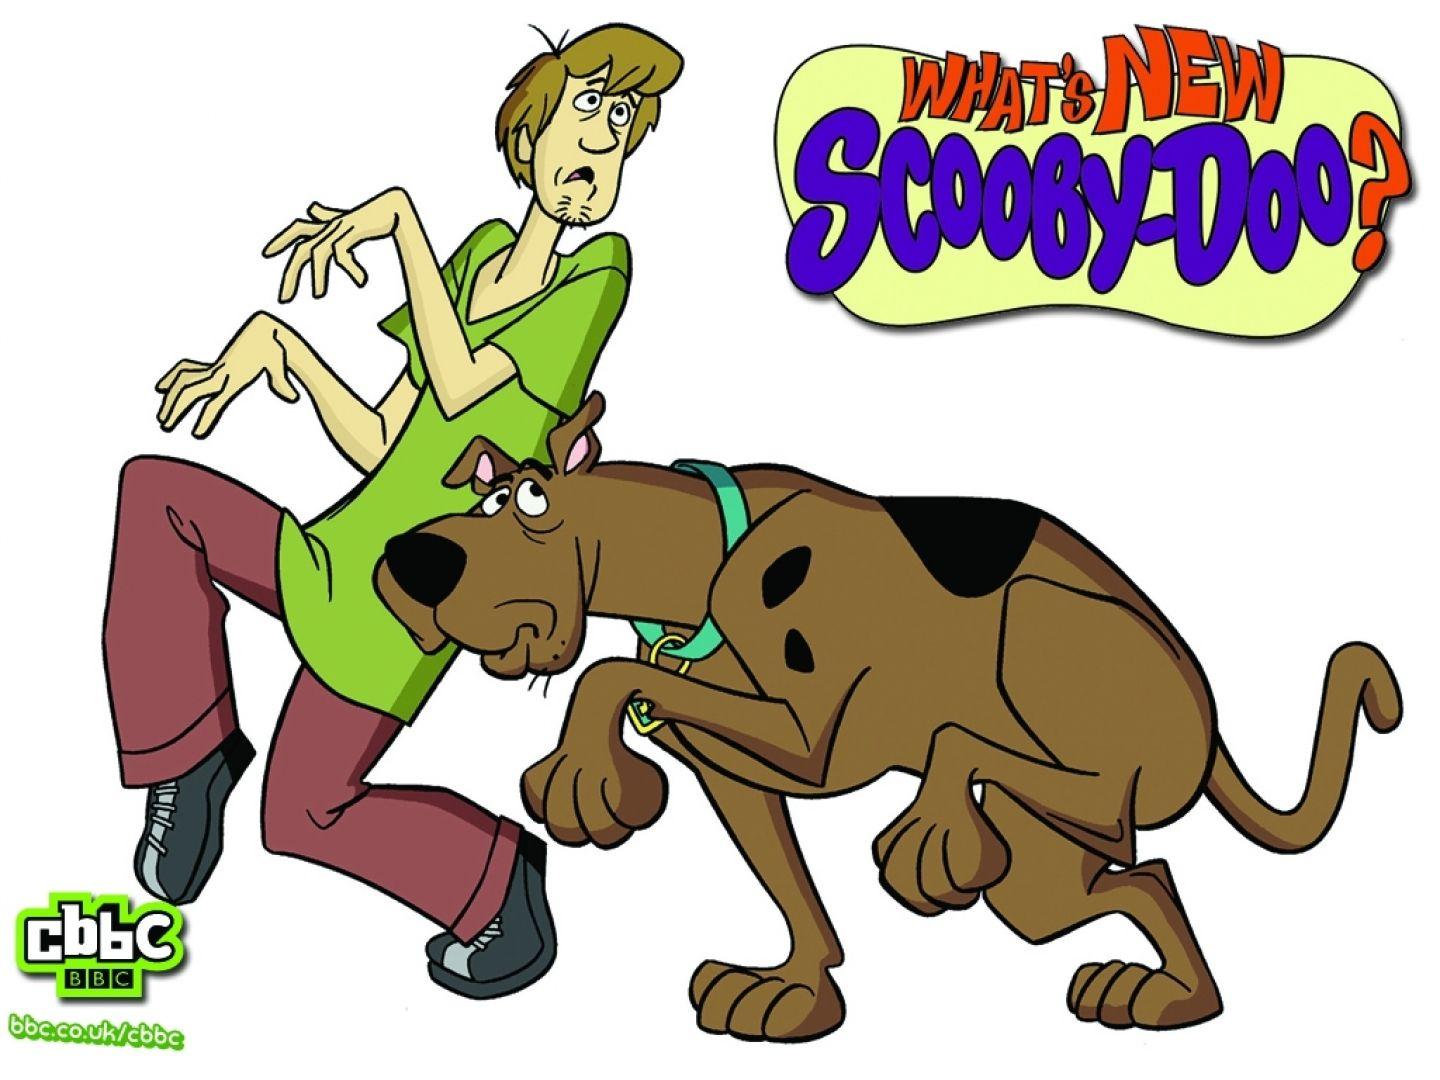 Scooby Doo and Shaggy Wallpaper for iPhone